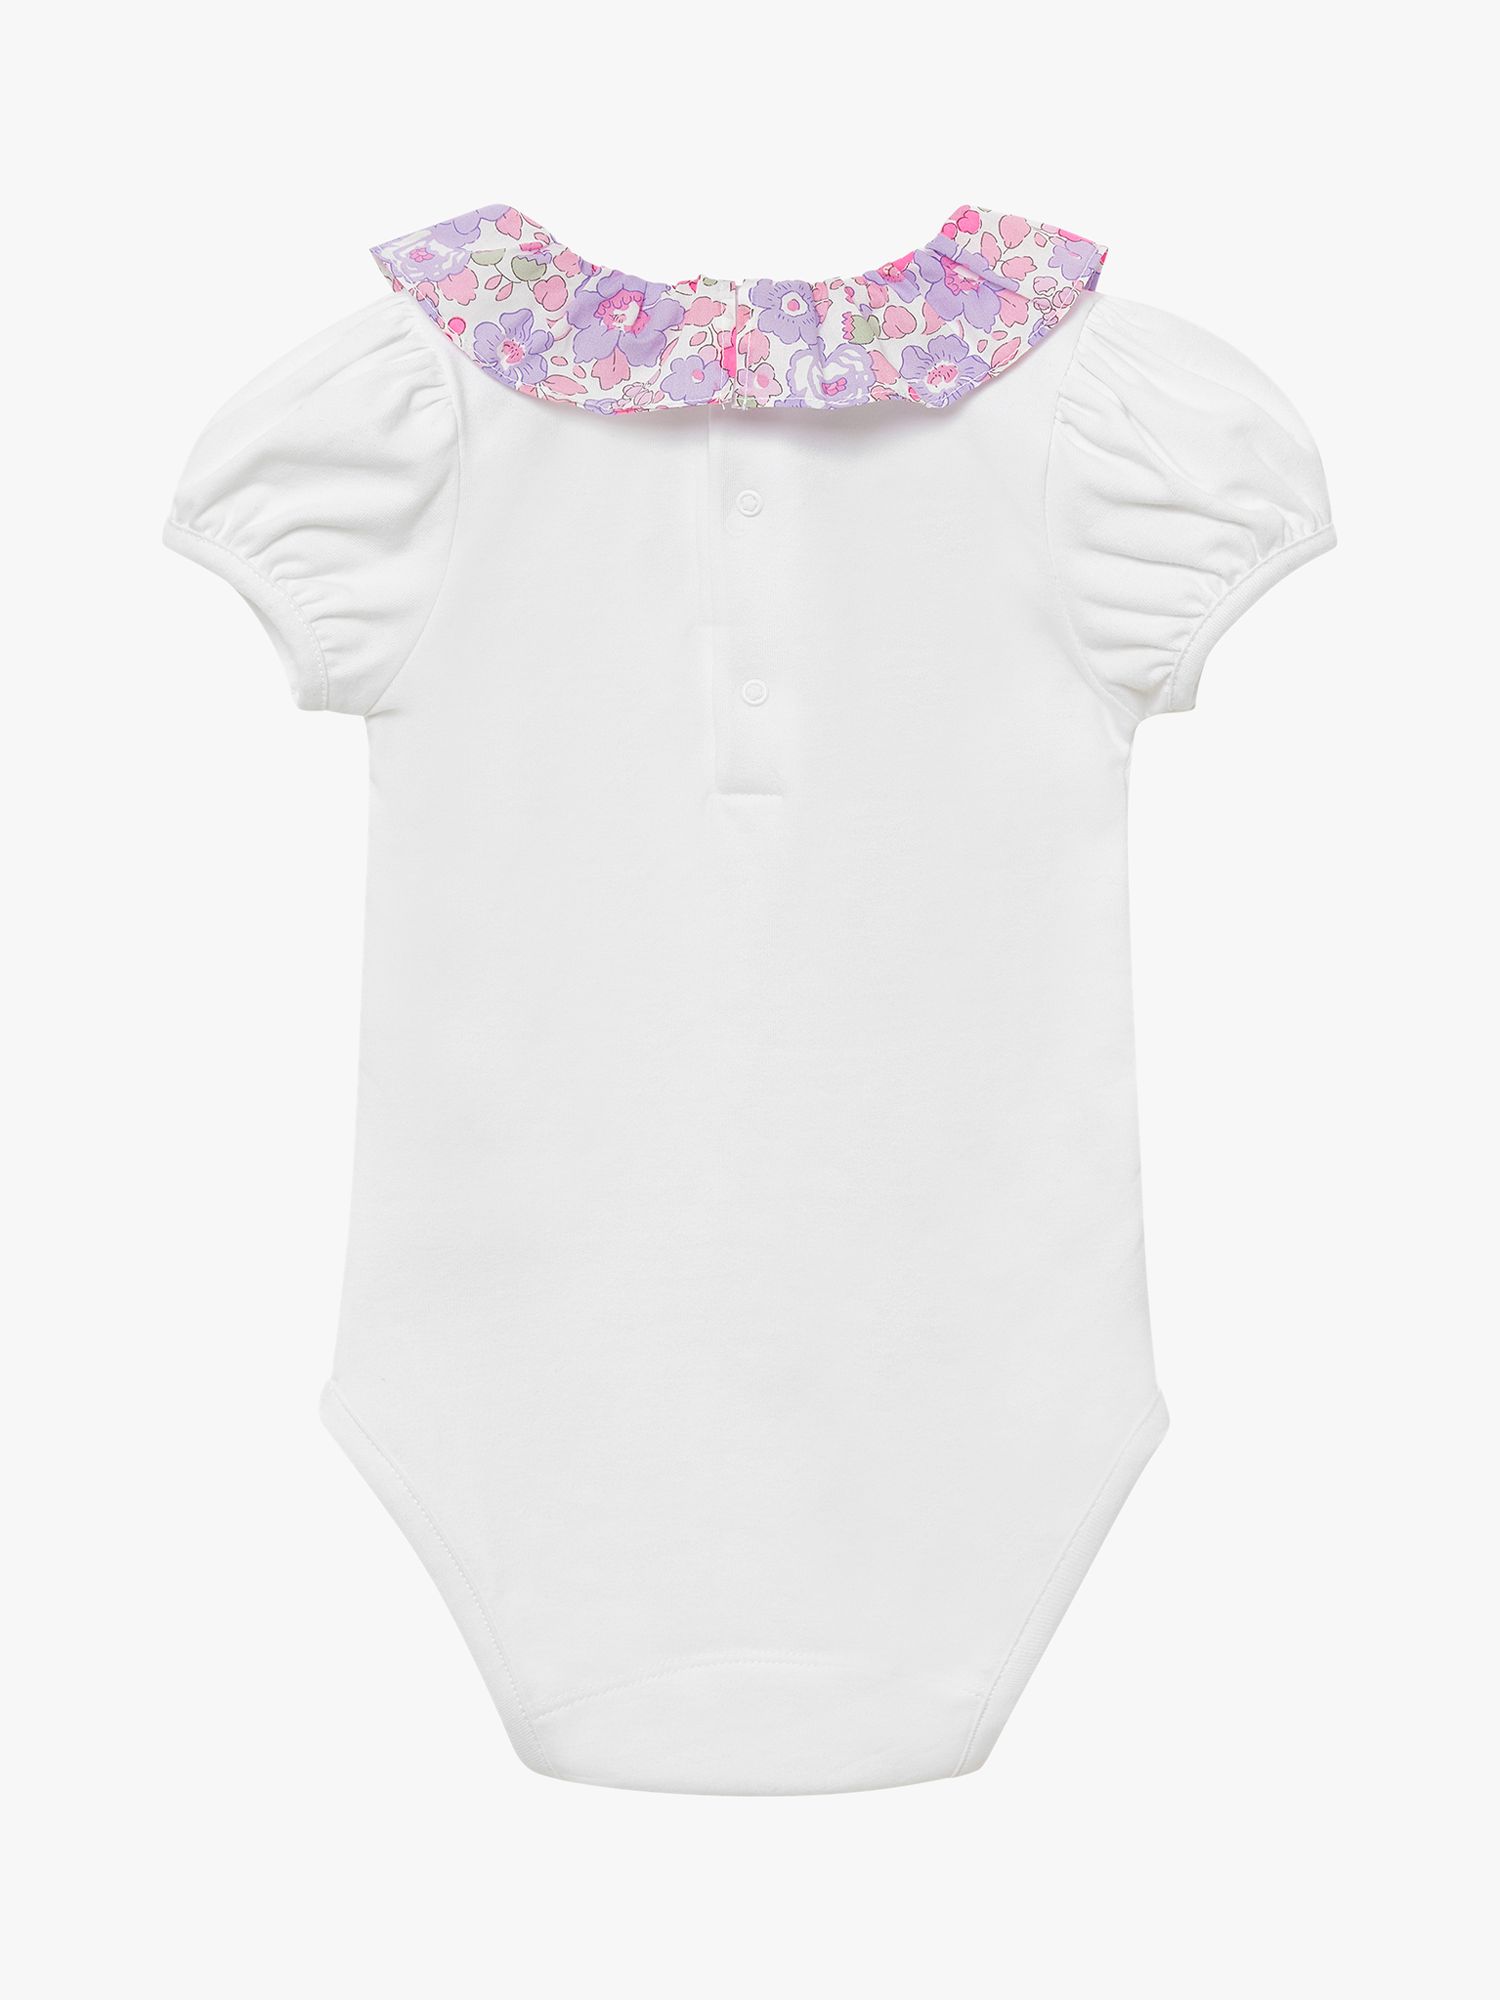 Buy Trotters Baby Betsy Willow Bodysuit, Lilac Betsy Online at johnlewis.com